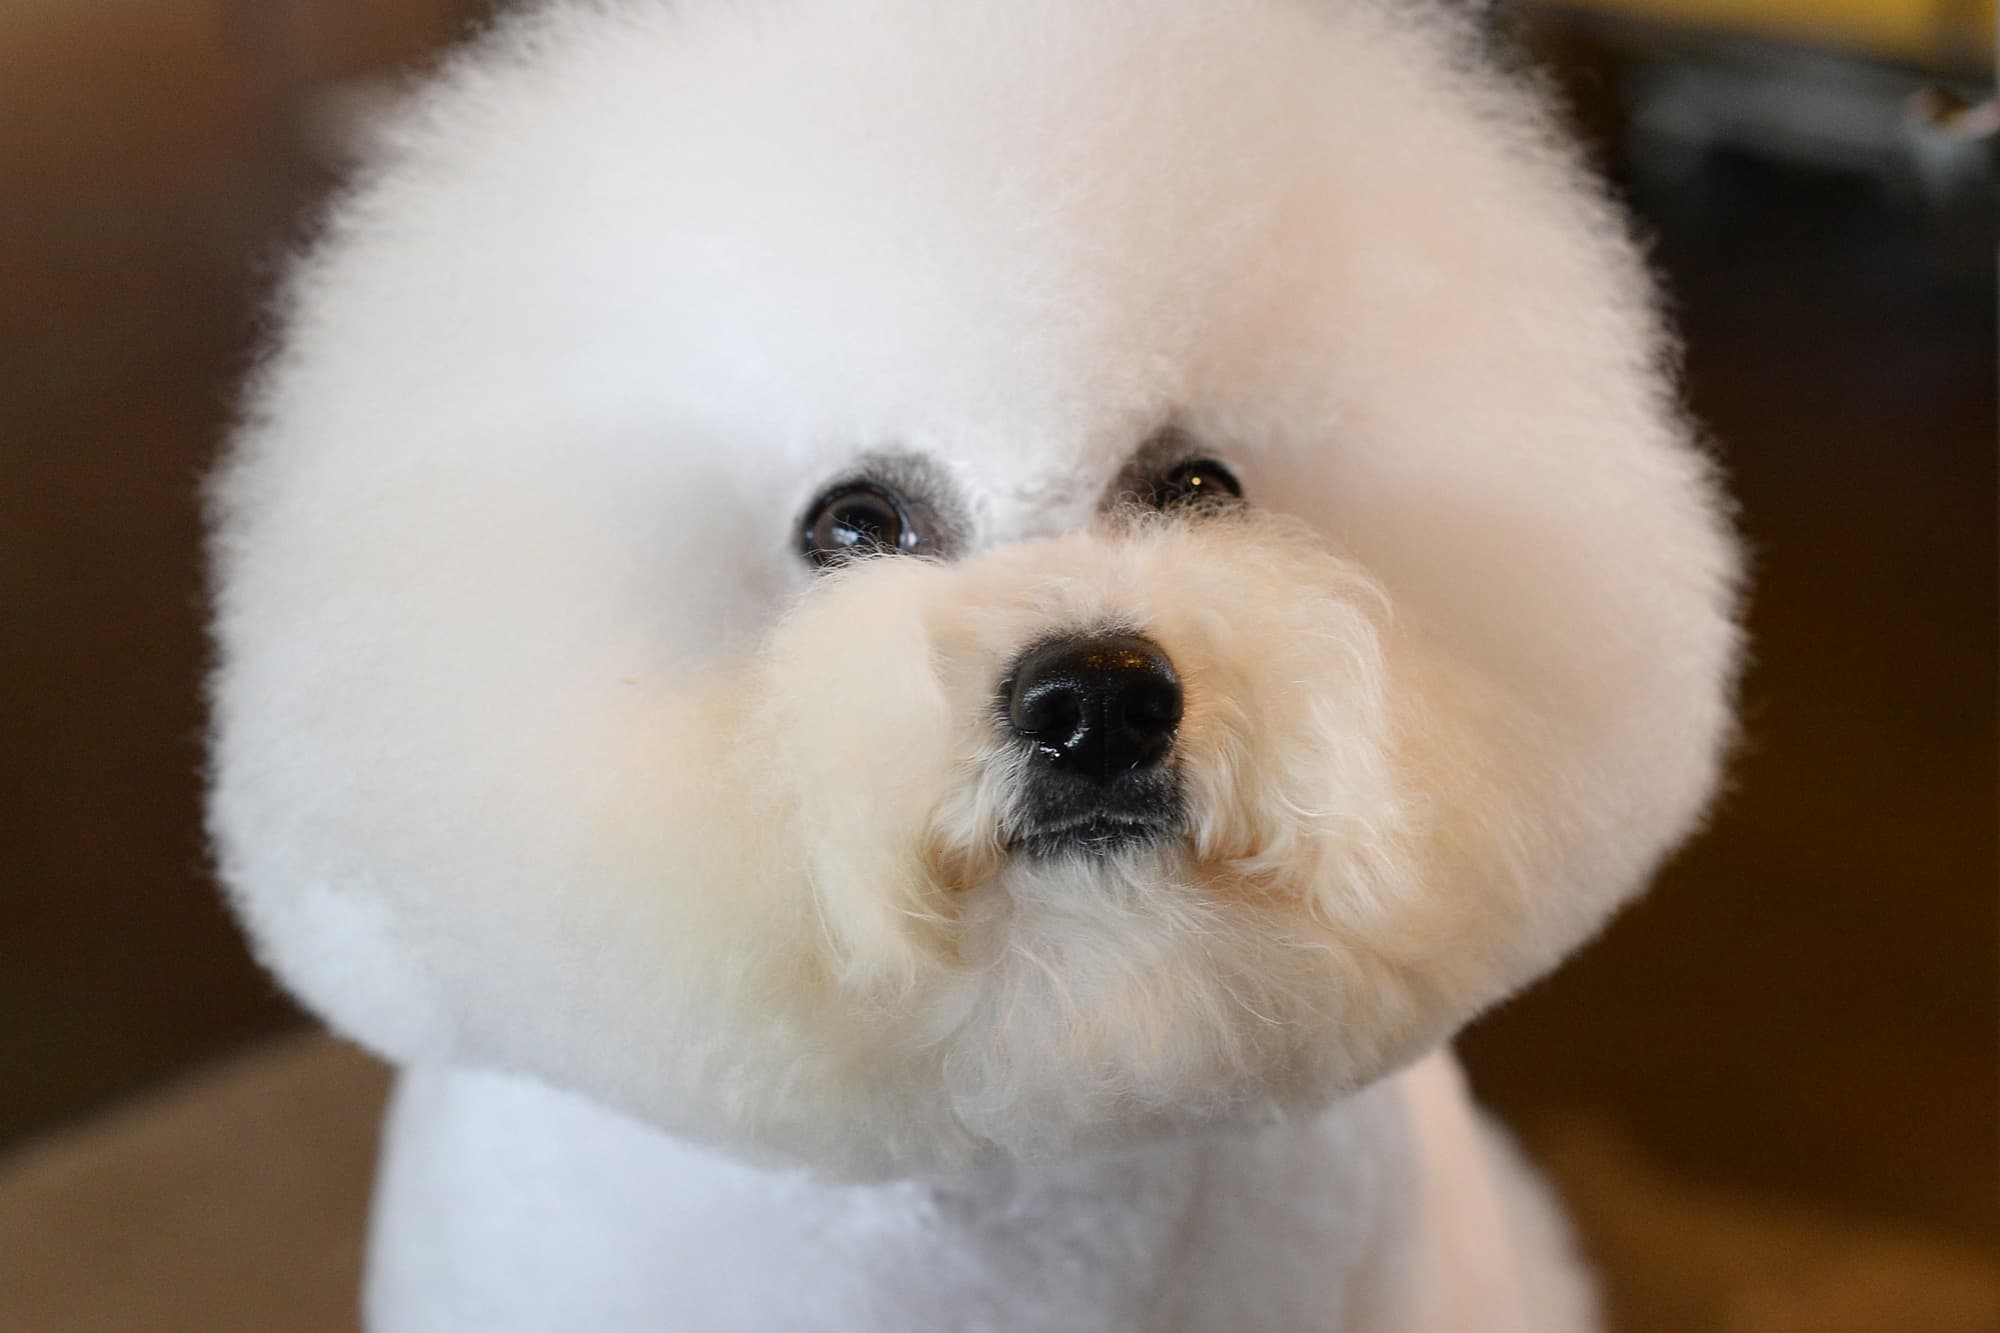 Grooming a show dog can have a $250,000 price tag